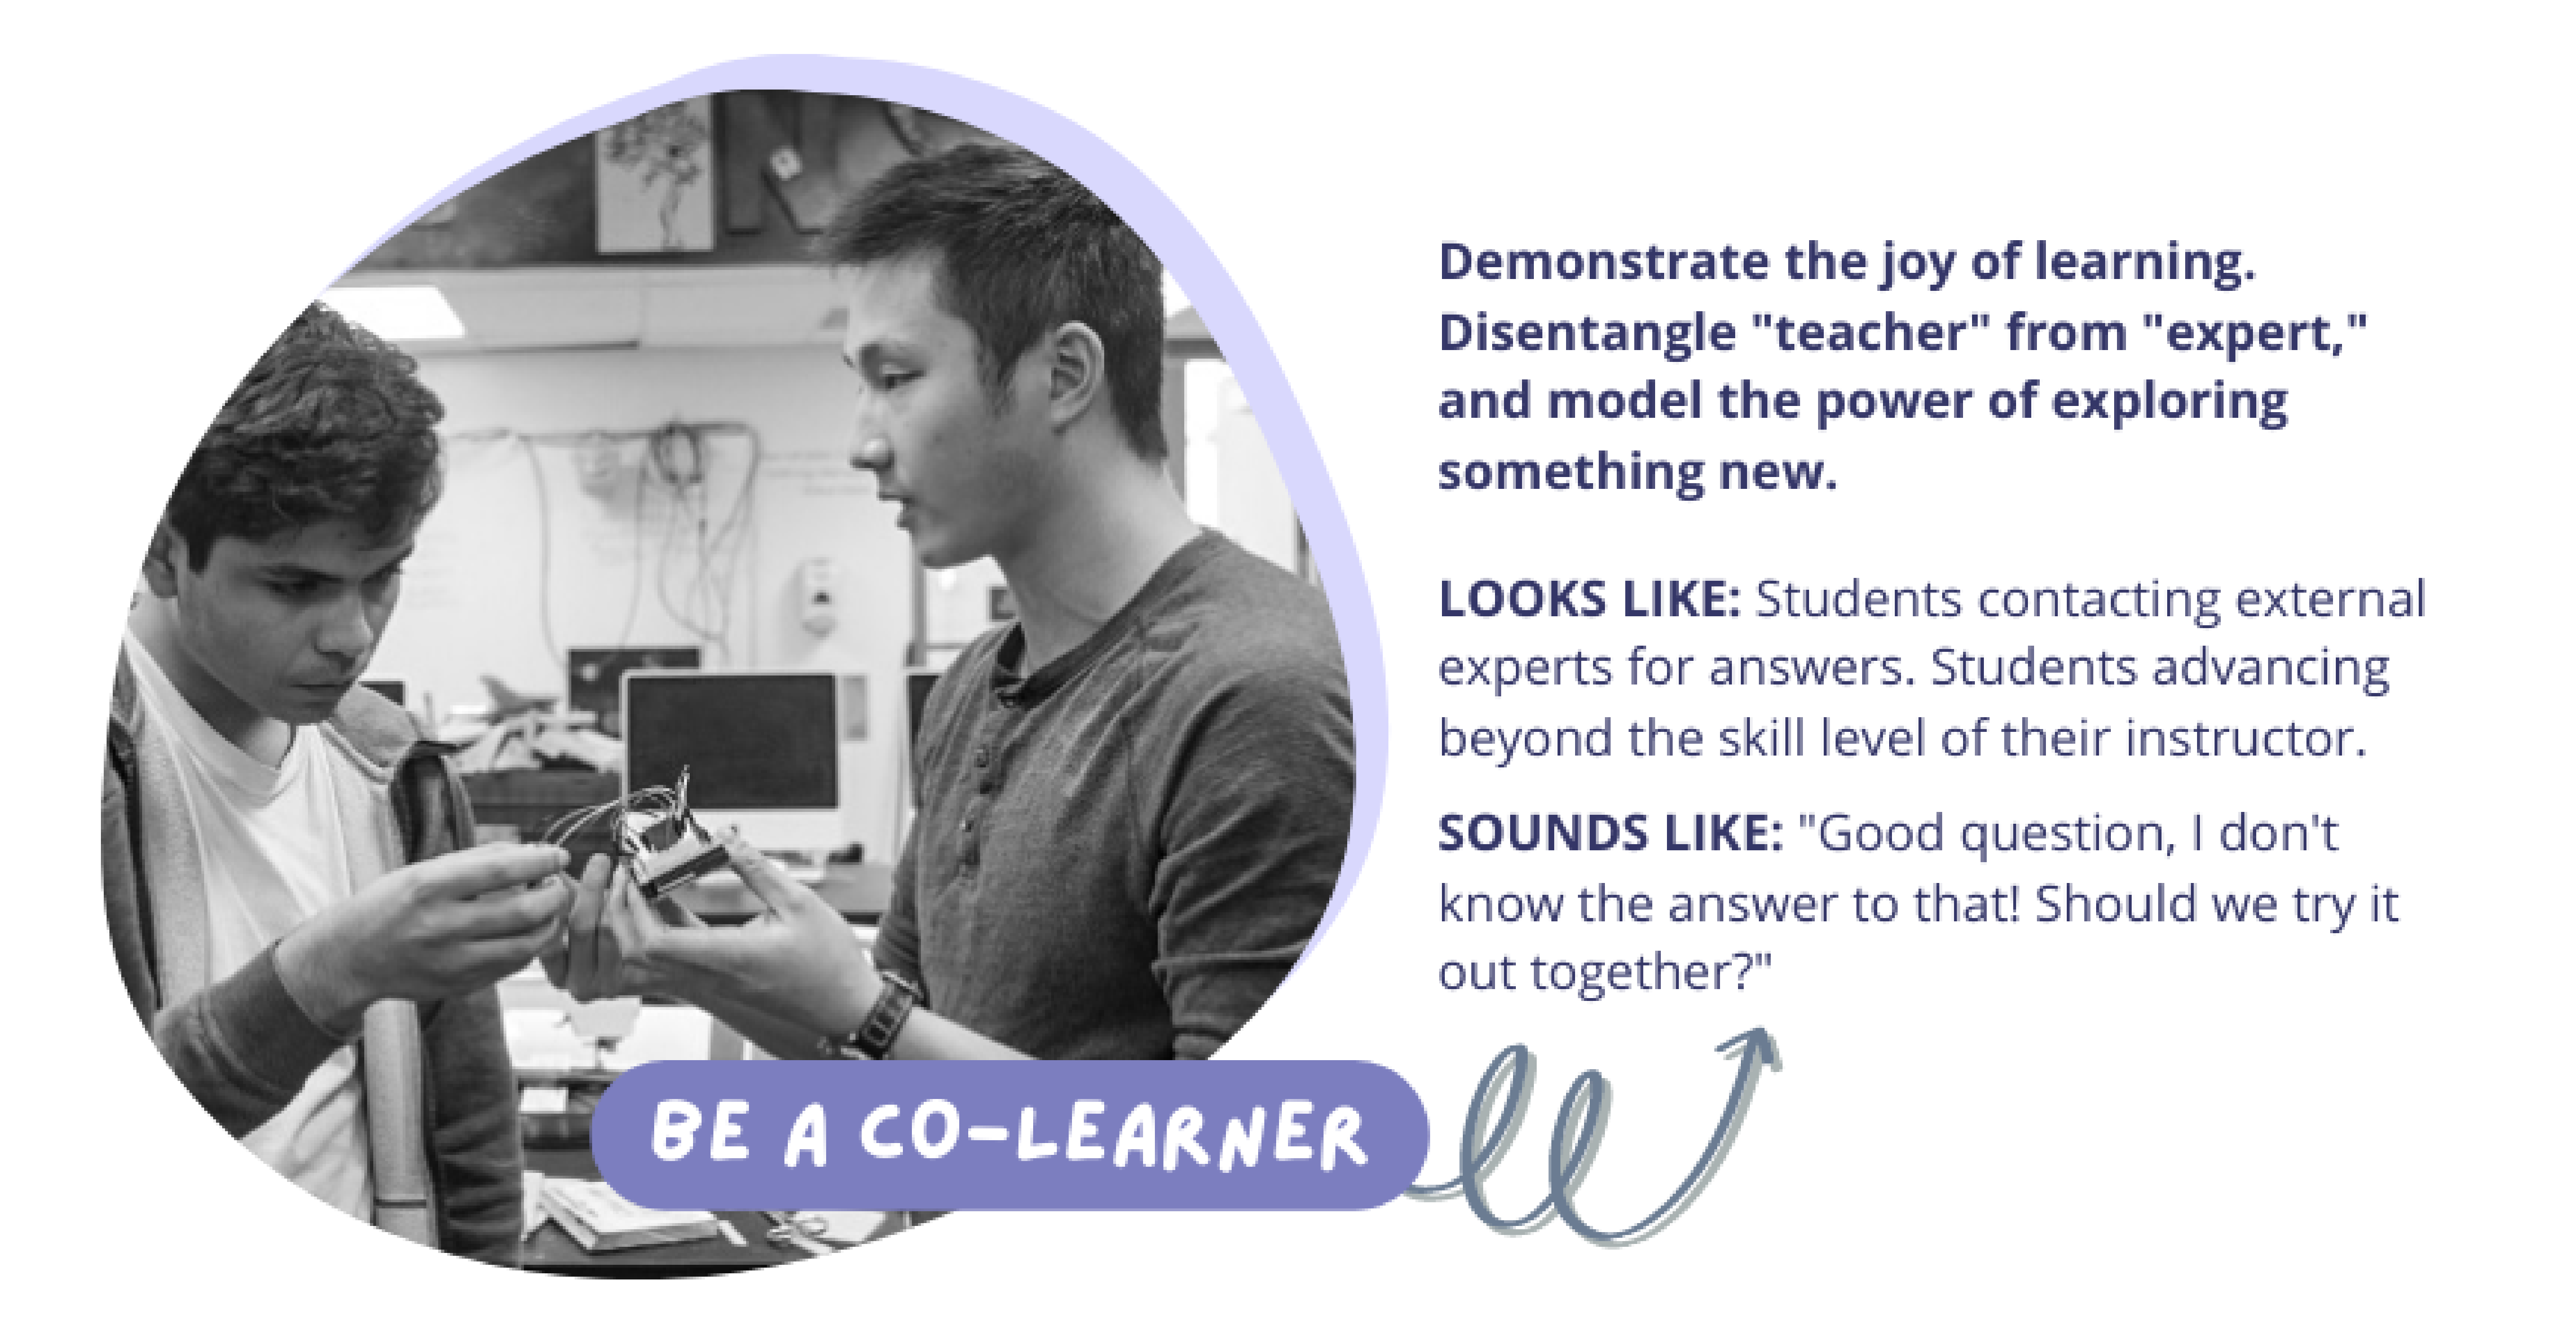 Be A Co Learner: Demonstrate the joy of learning. Disentangle "teacher" from "expert," and model the power of exploring something new.